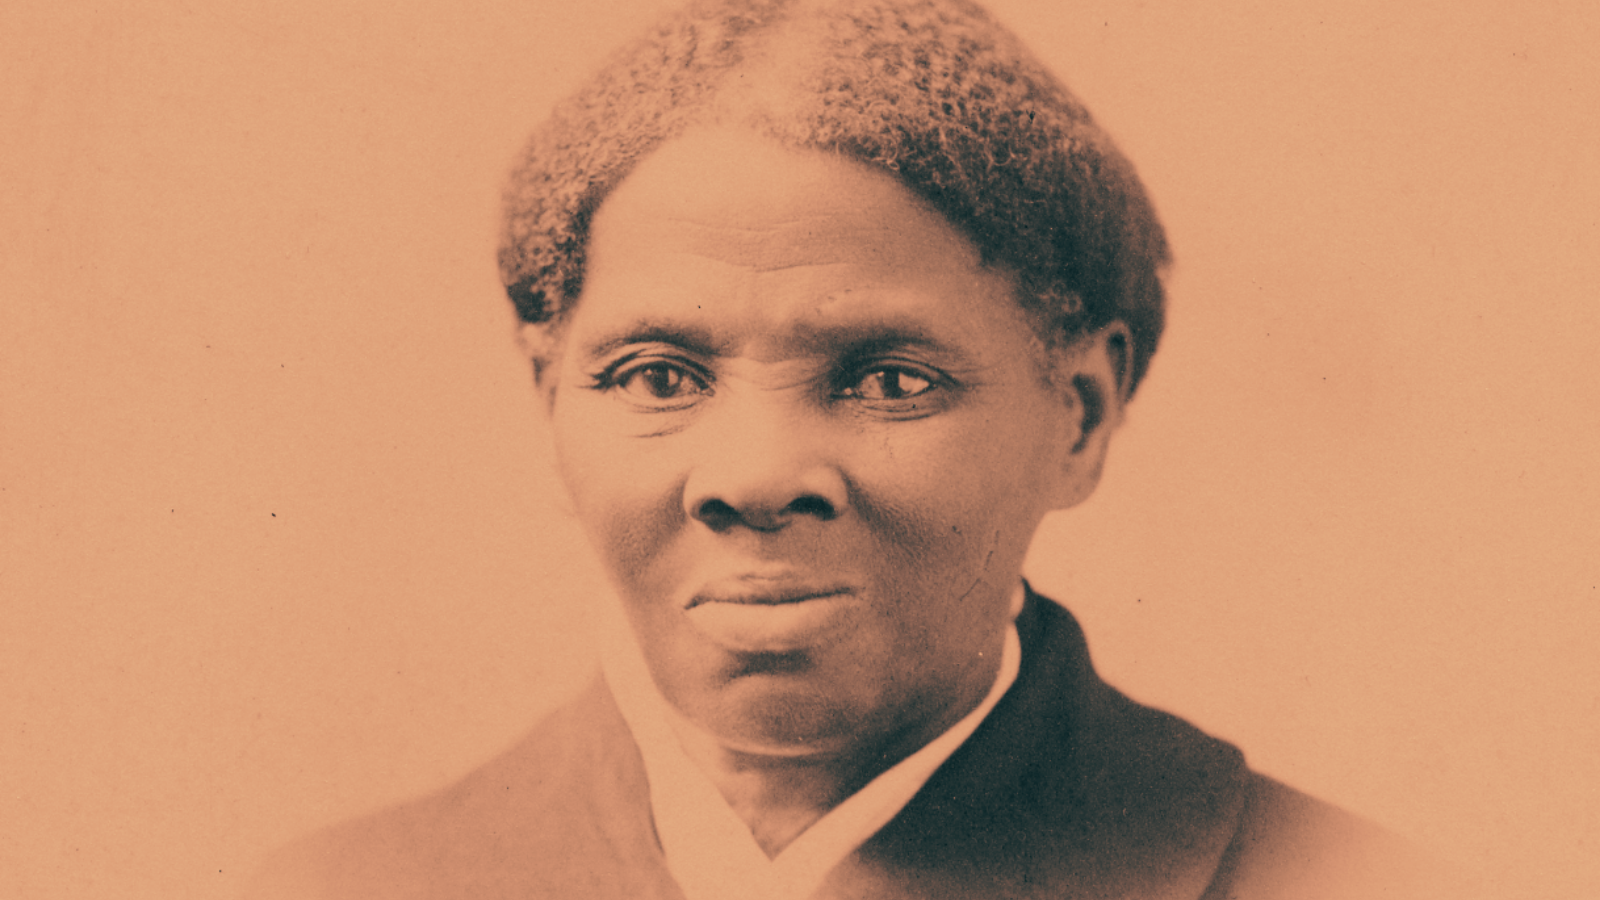 Harriet Tubman Abolitionist Hero To Replace Andrew Jackson On 20 Bill   uInterview